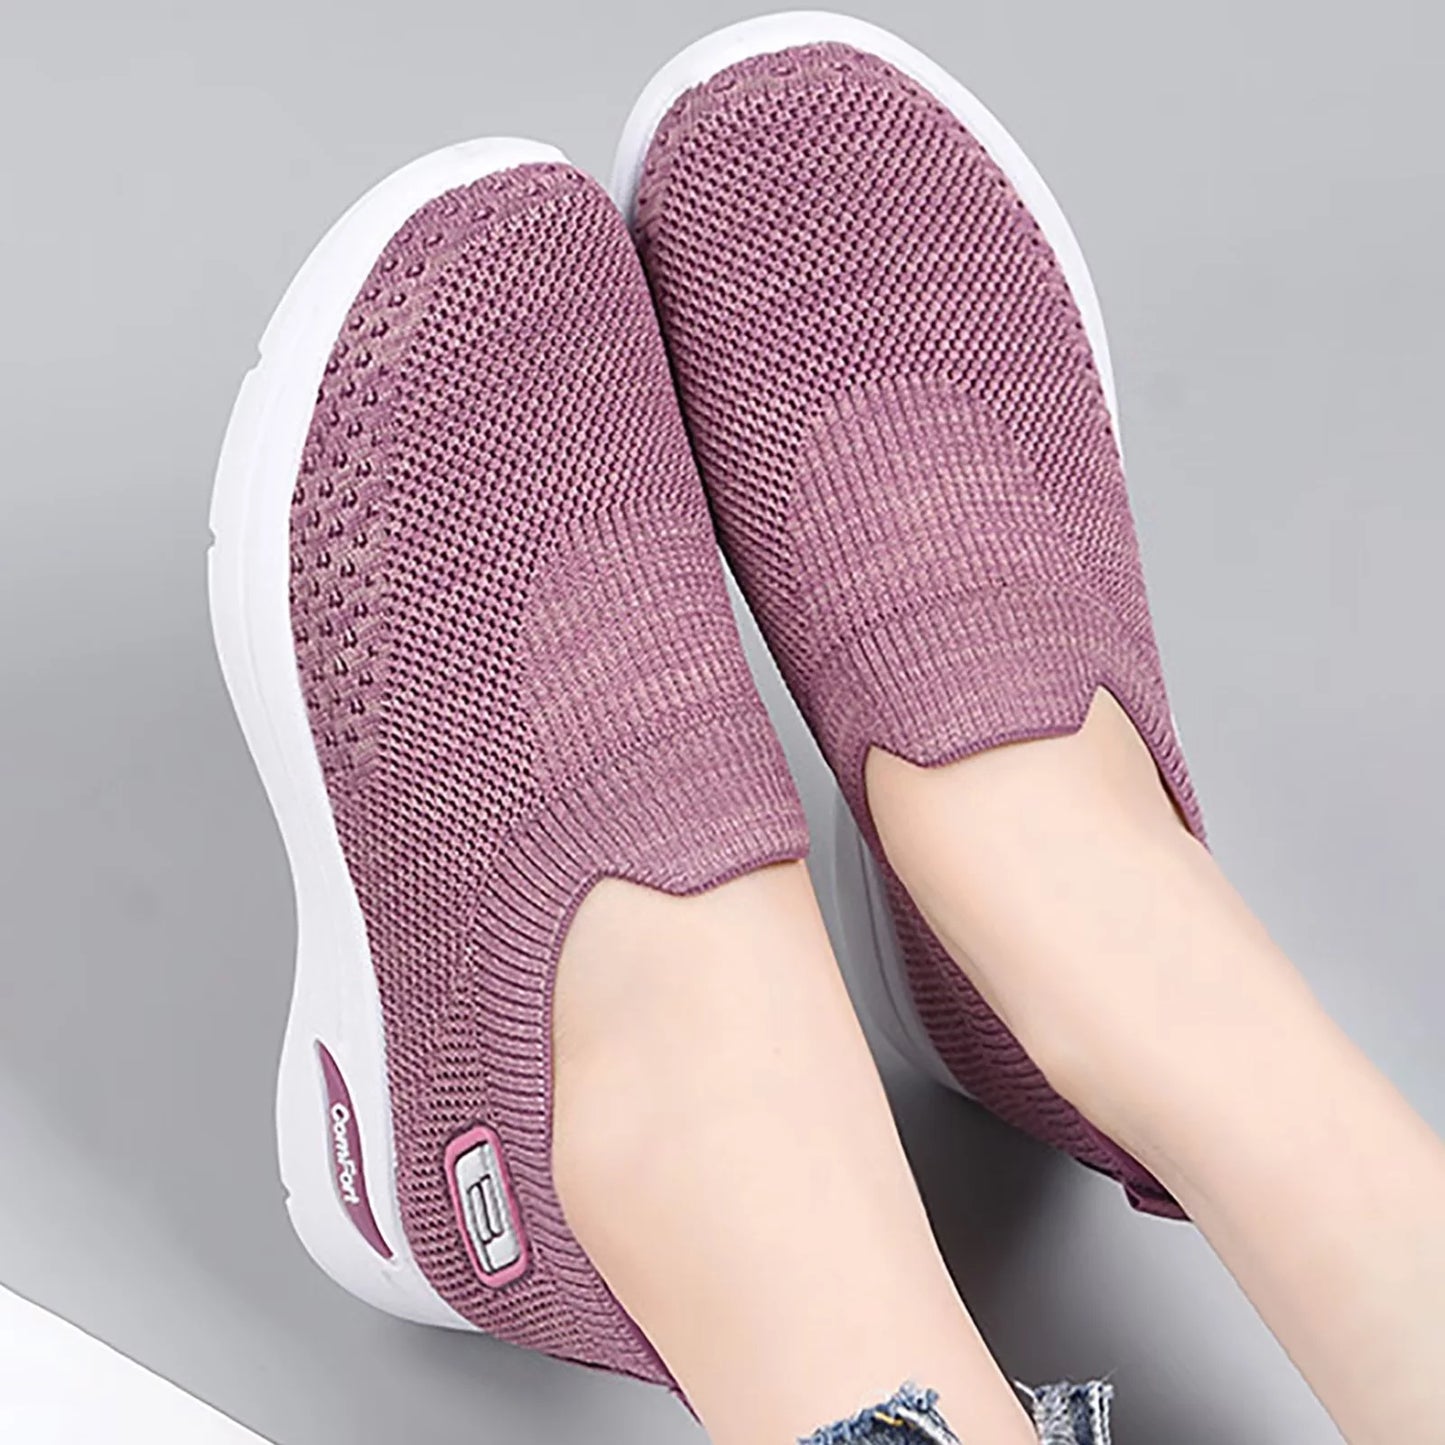 ComFort™ - ORTHOPEDIC SHOES WITH INNOVATIVE SOLE